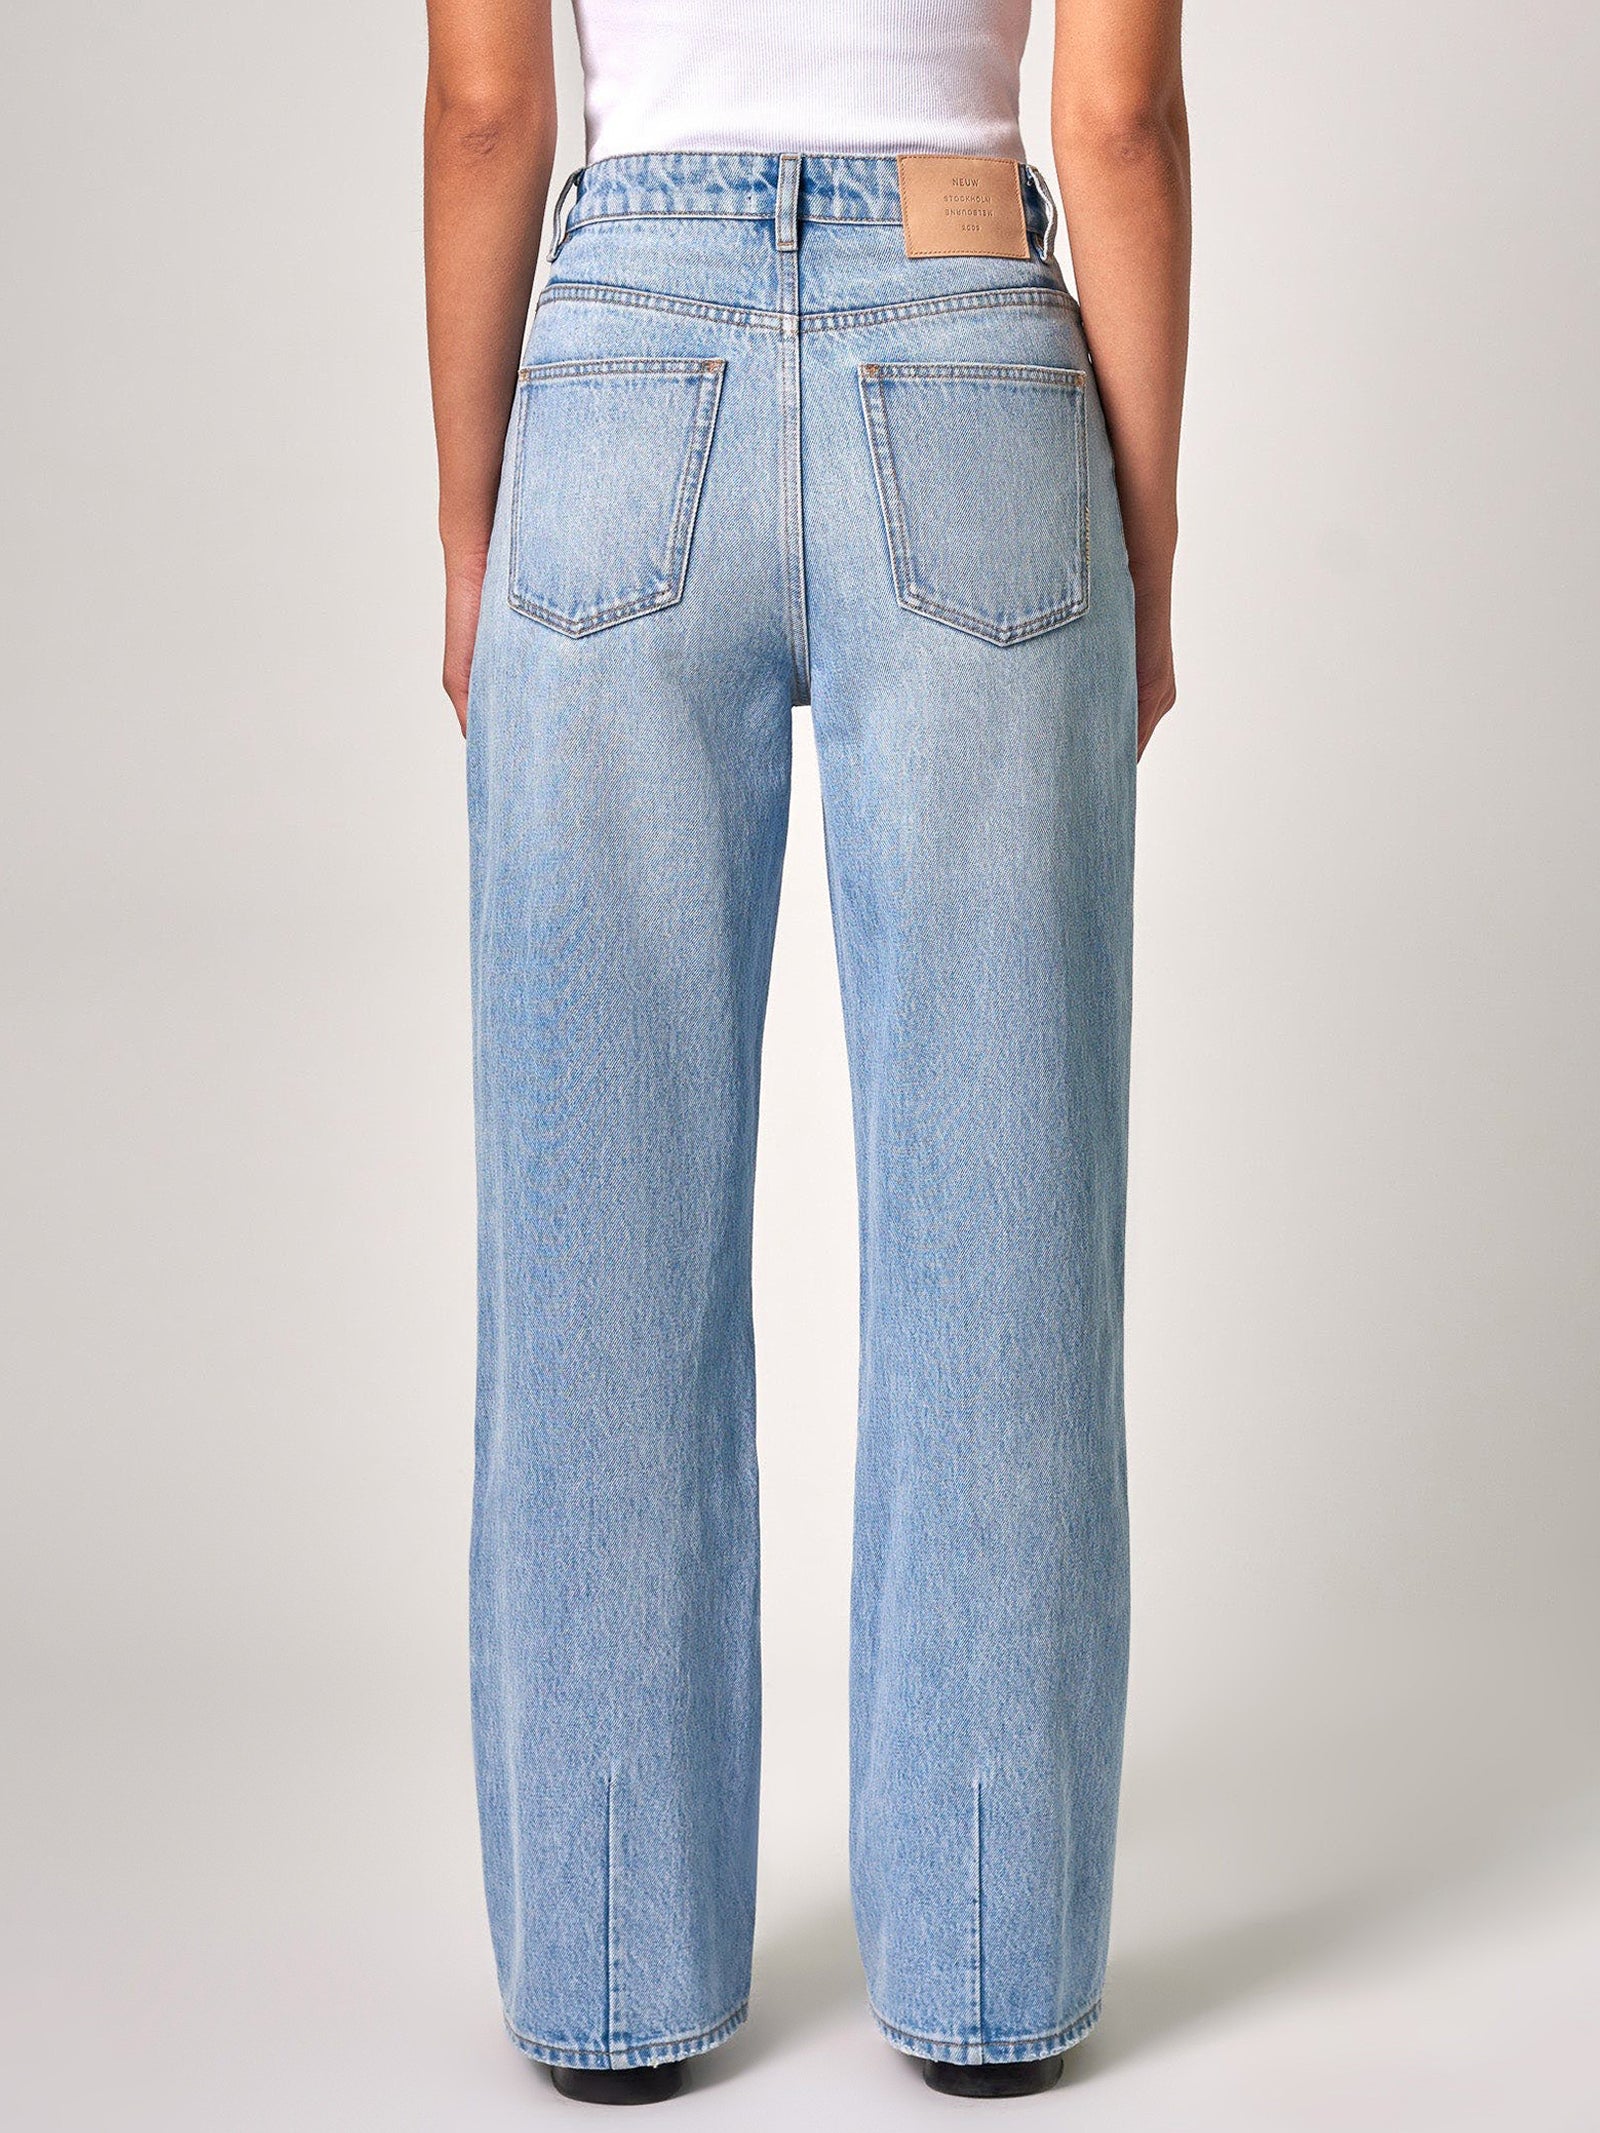 Coco Relaxed Brooklyn Jeans in Mid Vintage Indigo